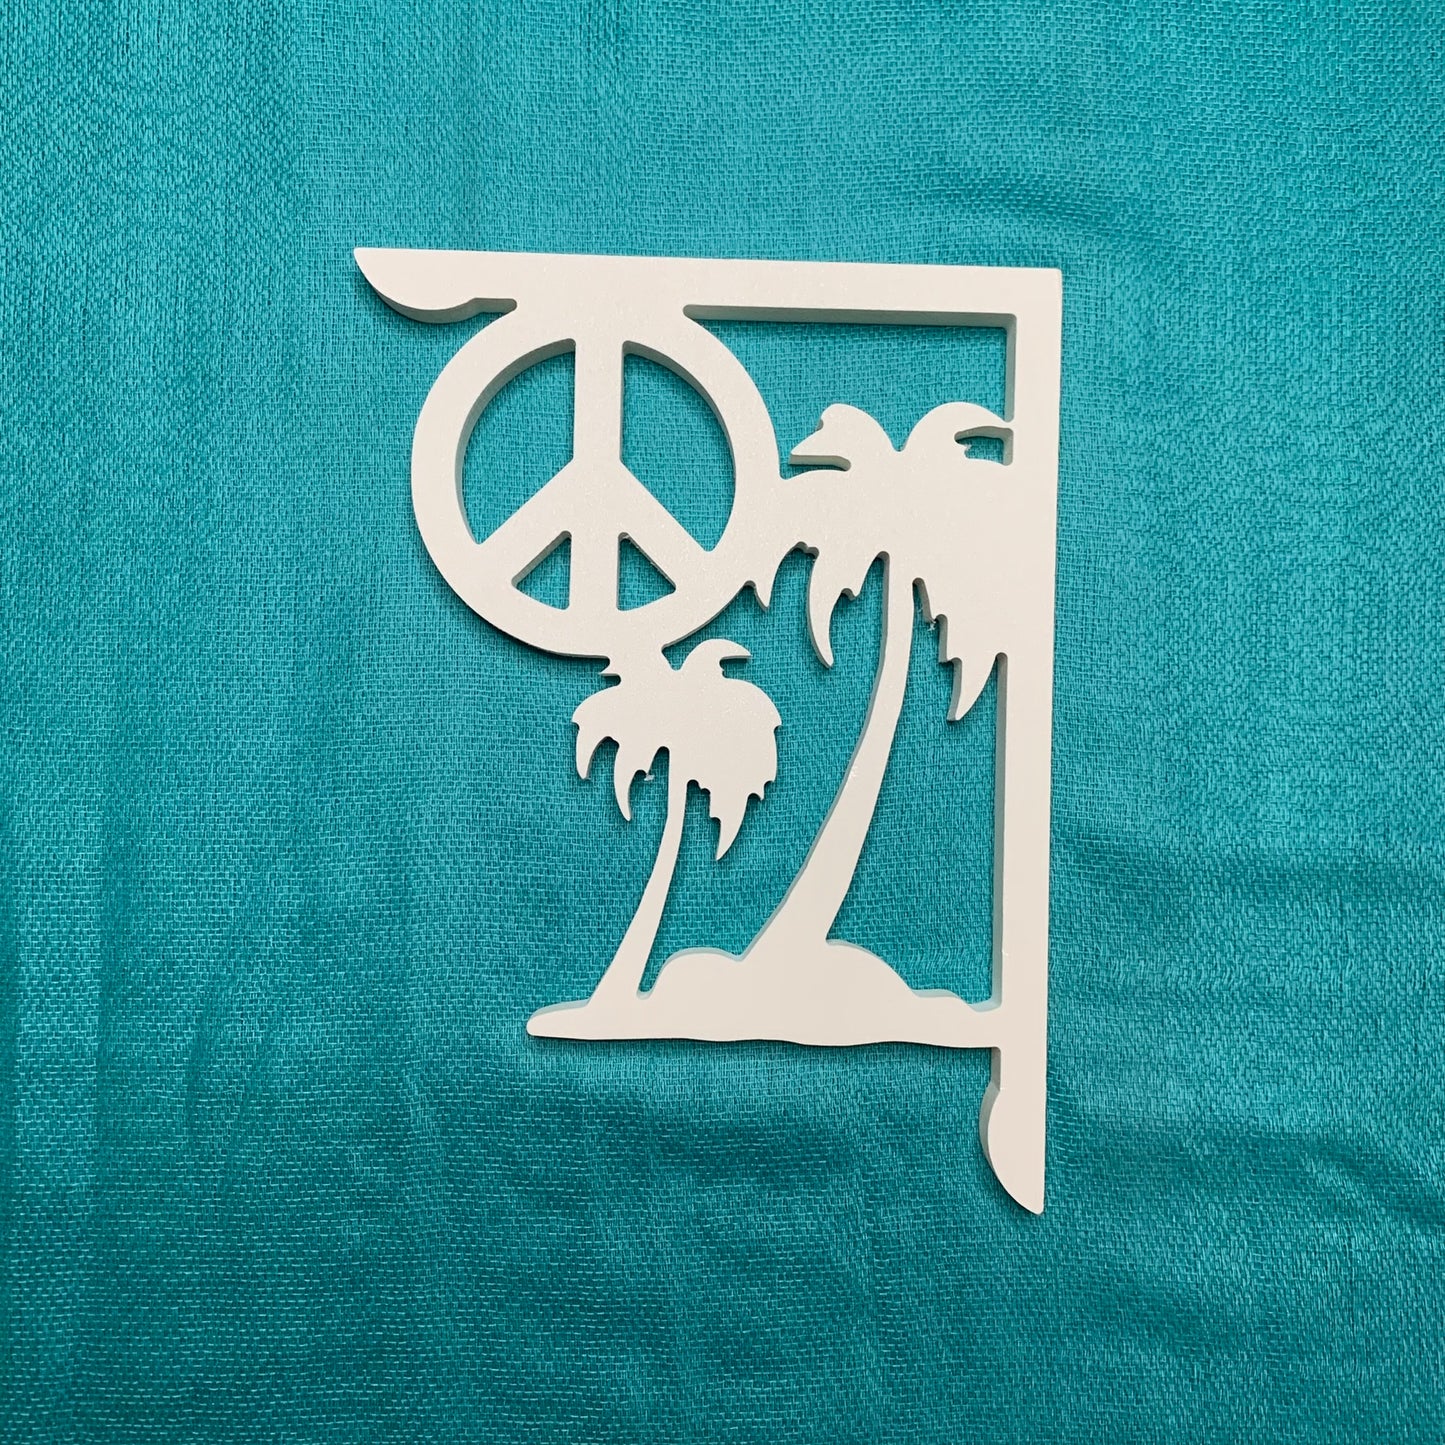 Mailbox Bracket - Palm Tree with Peace Sign Small 7x9 inch, Custom Mailbox, Coastal, Tropical, Bracket, Outdoor Decor, Mailbox & Post Not Included